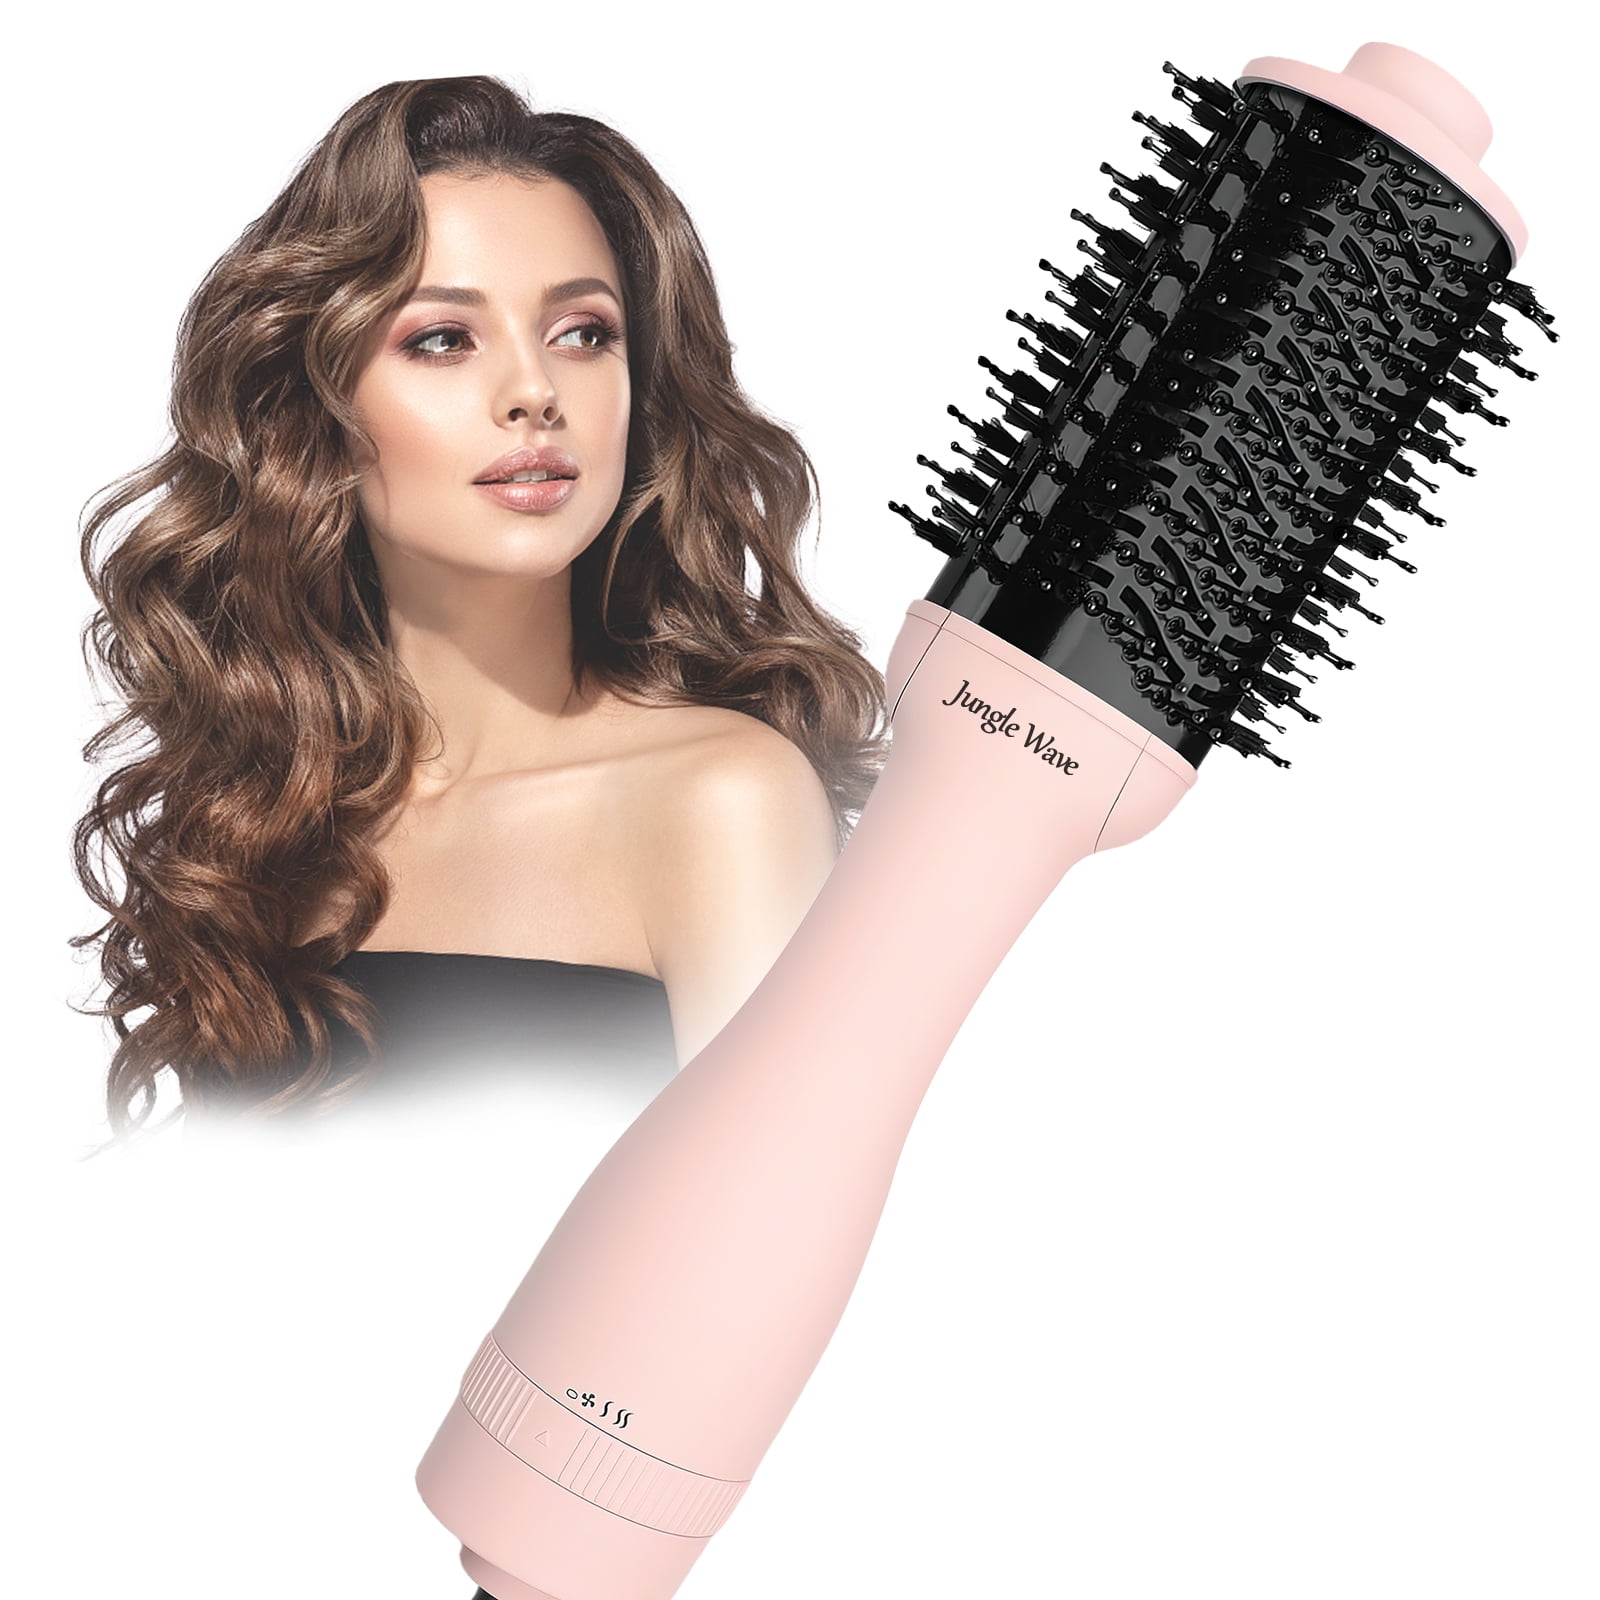  IG INGLAM MegaAIR Styler, 5 in-1 Professional Hair Dryer Brush  110,000 RPM Brushless BLDC Motor Ionic Hot Air Styler Volumizing and Shape,  Pink : Beauty & Personal Care